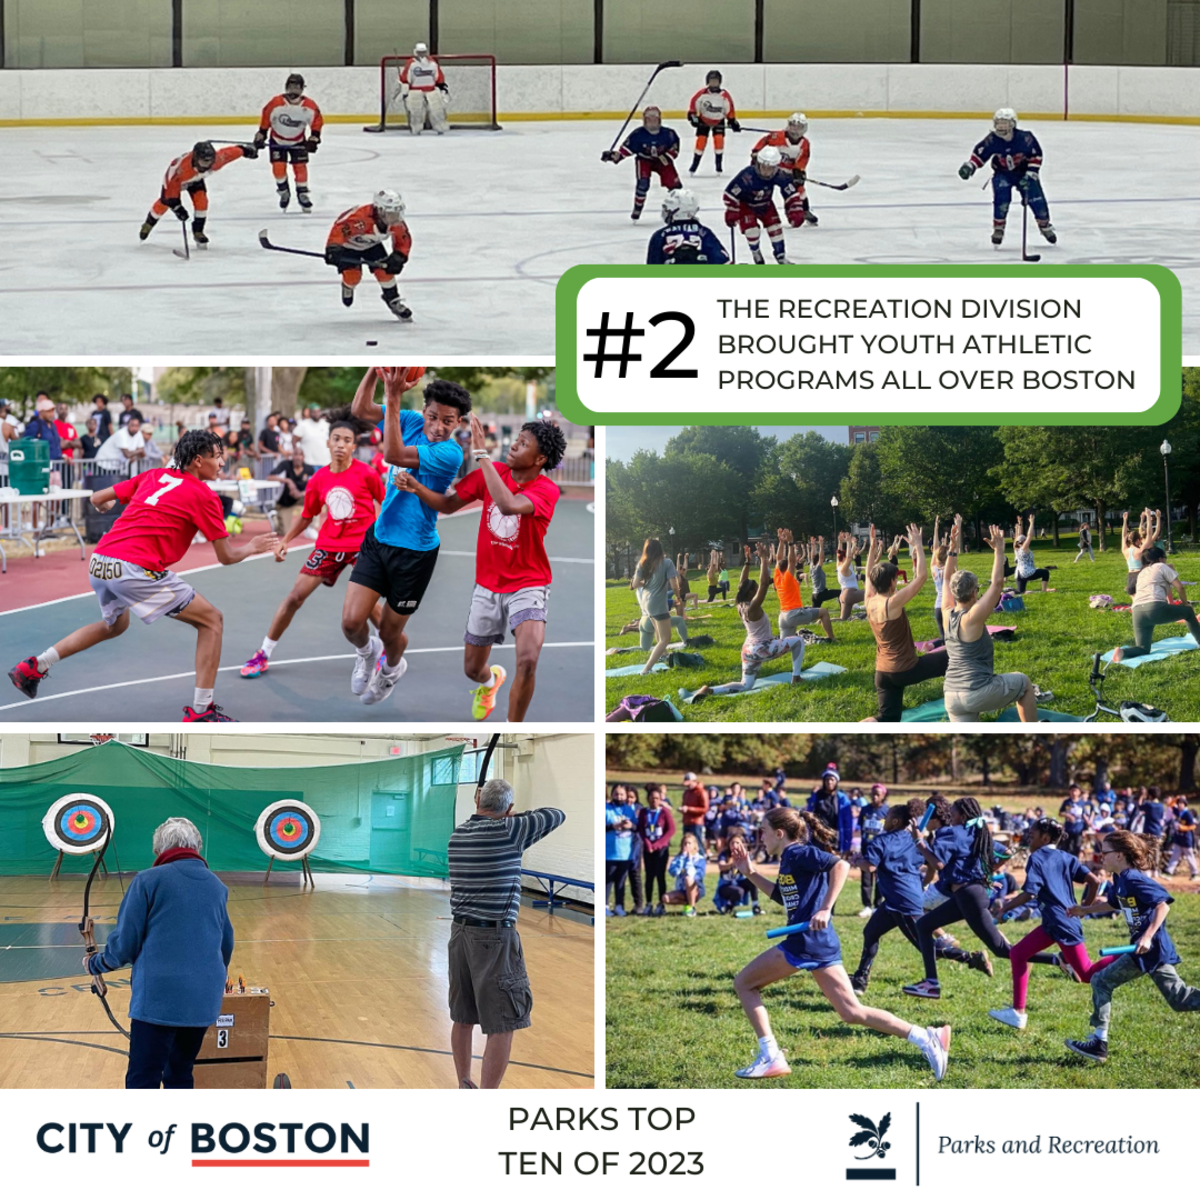 THE RECREATION DIVISION BROUGHT YOUTH ATHLETIC PROGRAMS ALL OVER BOSTON. Hickey, Soccer, Archery, Yoga, and Cross Country.